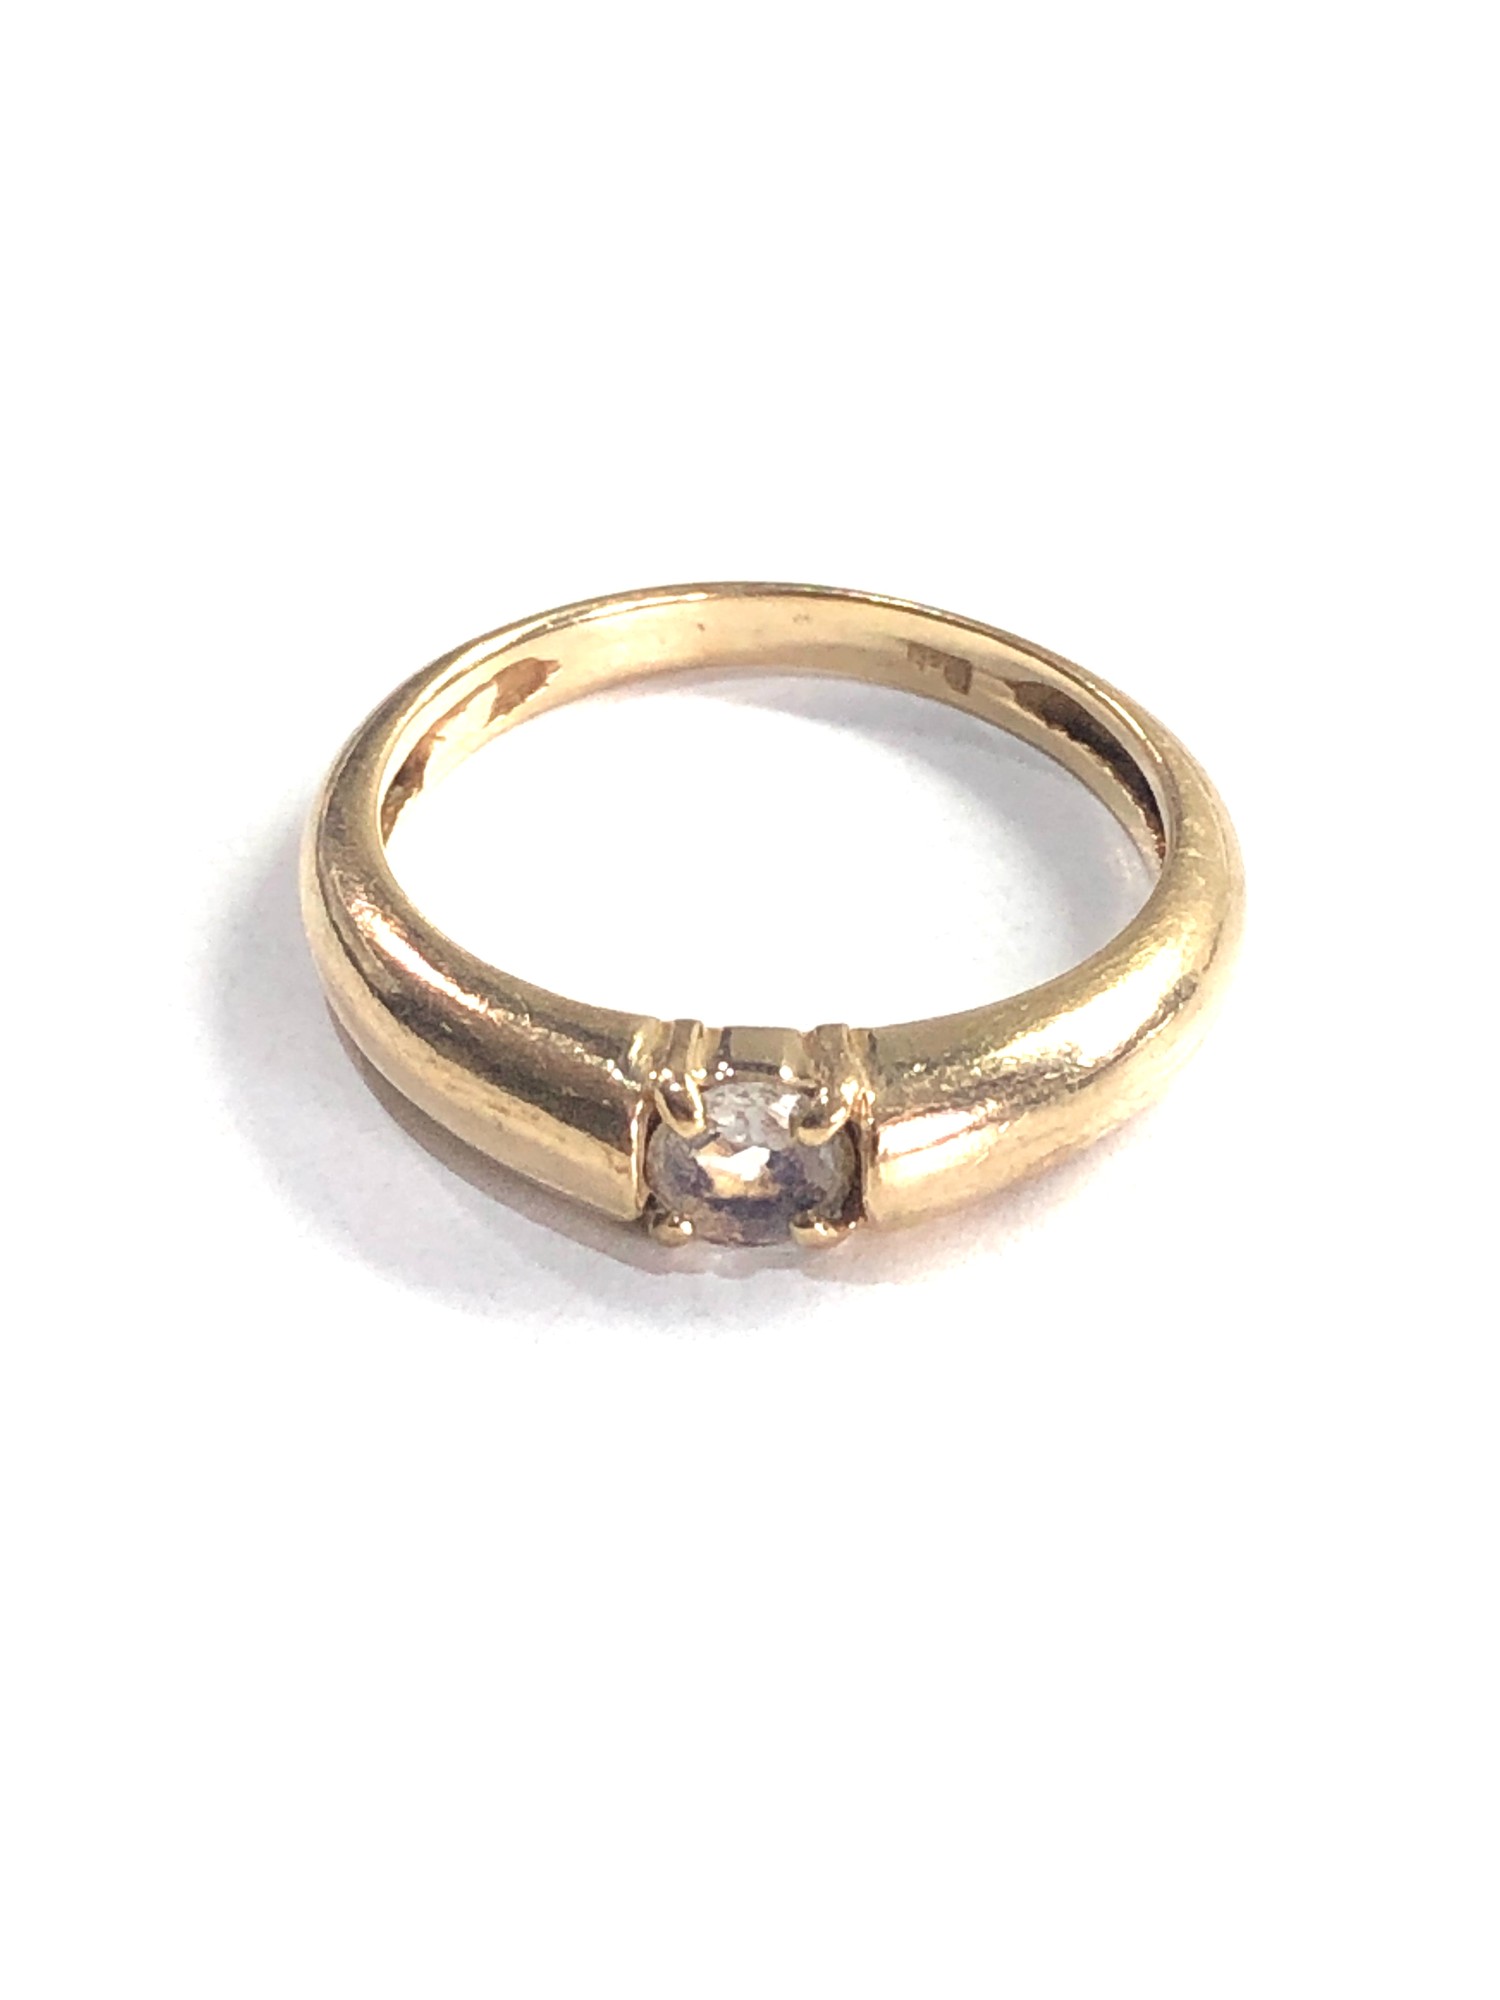 9ct gold moonstone solitaire ring 2.3g